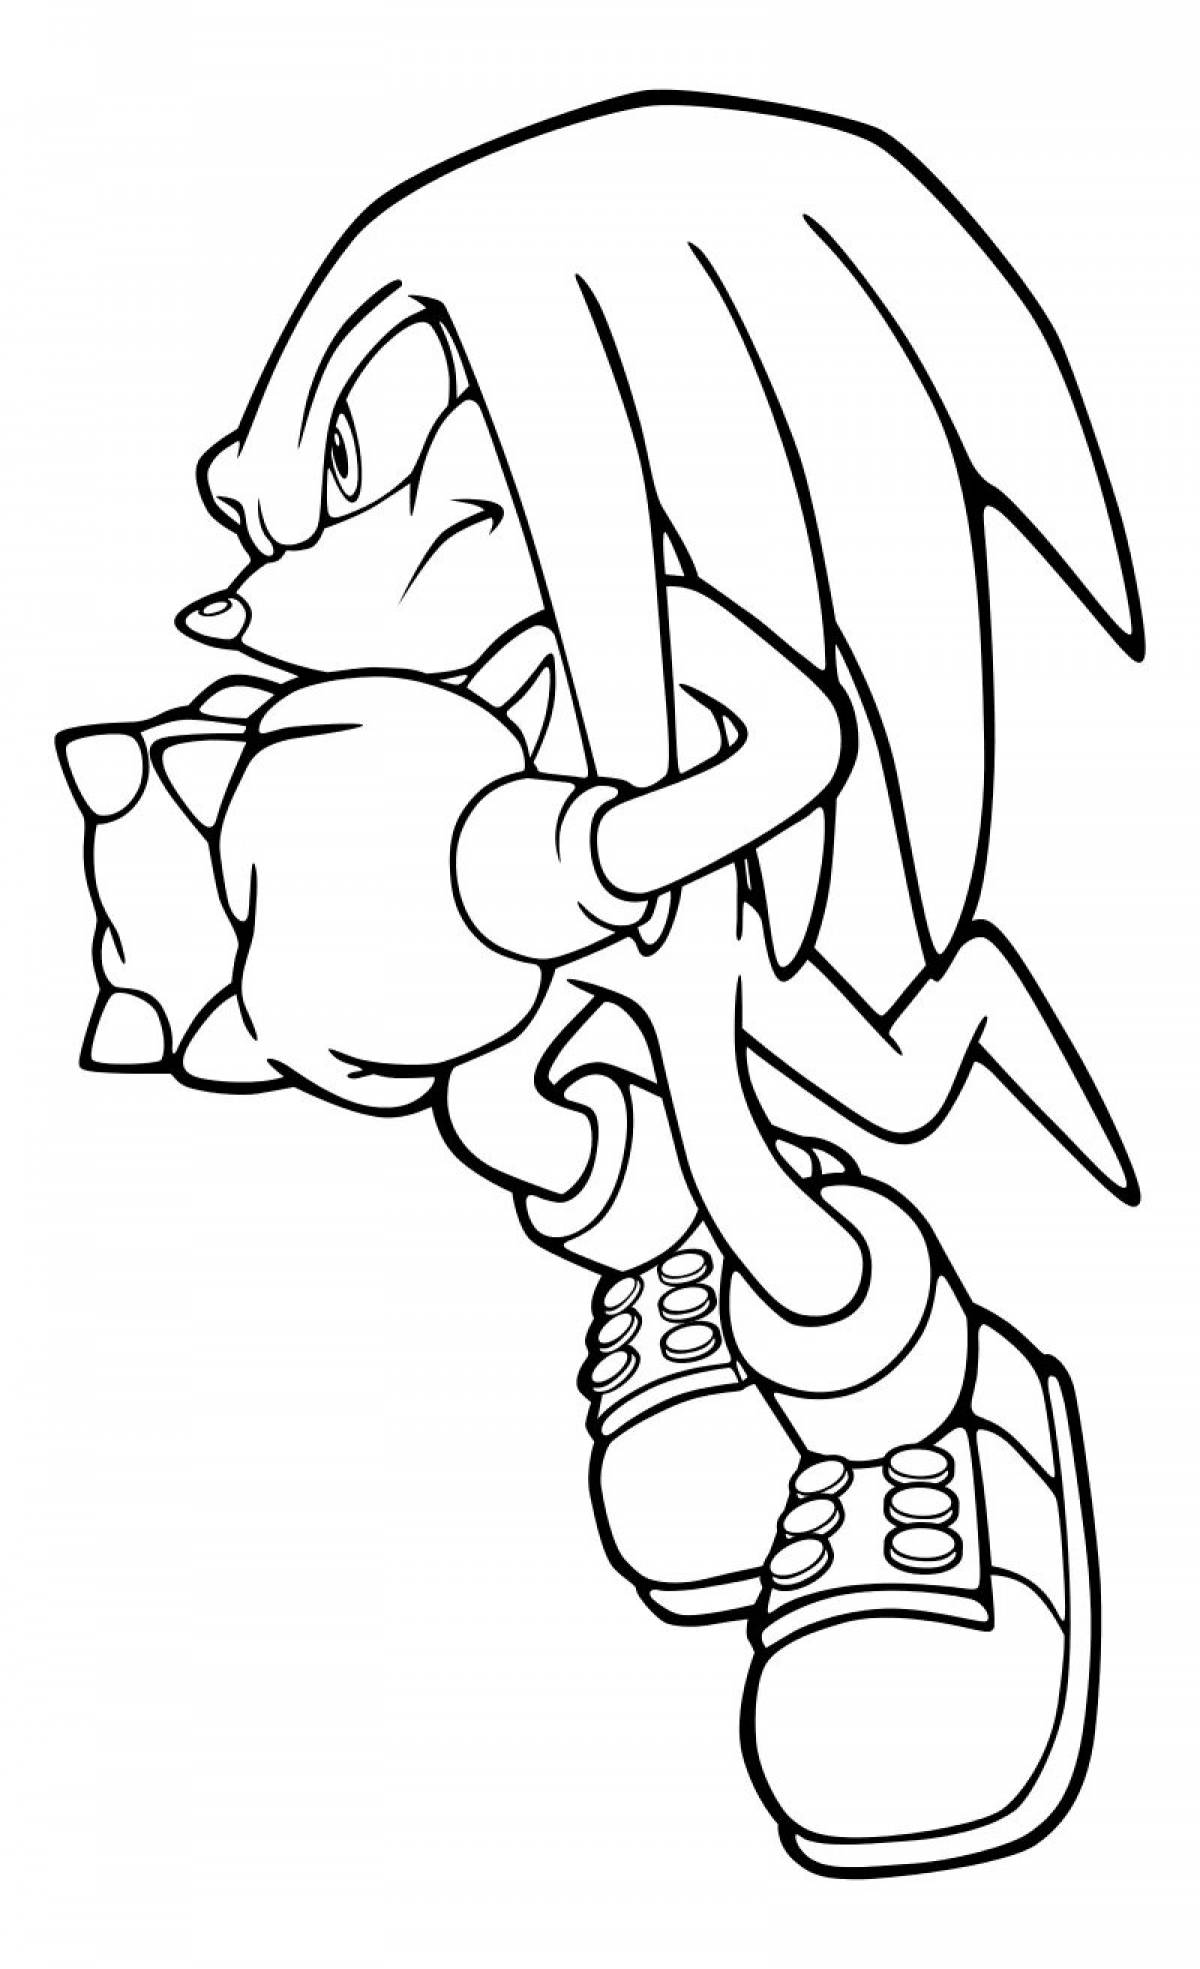 Exciting coloring super knuckles